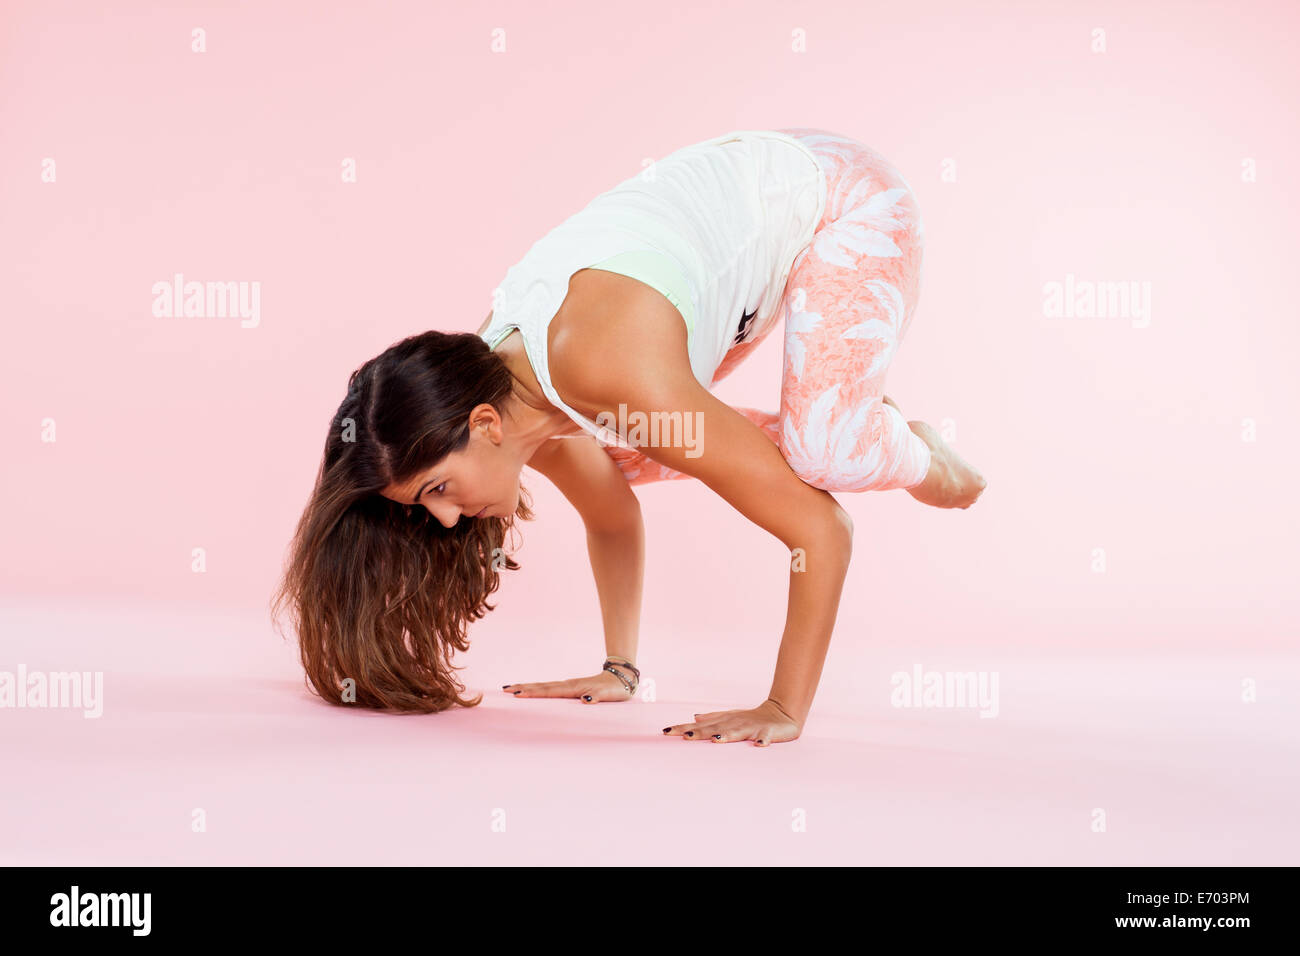 Studio shot of young woman in yoga position balancing with hands on floor and knees on elbows Stock Photo